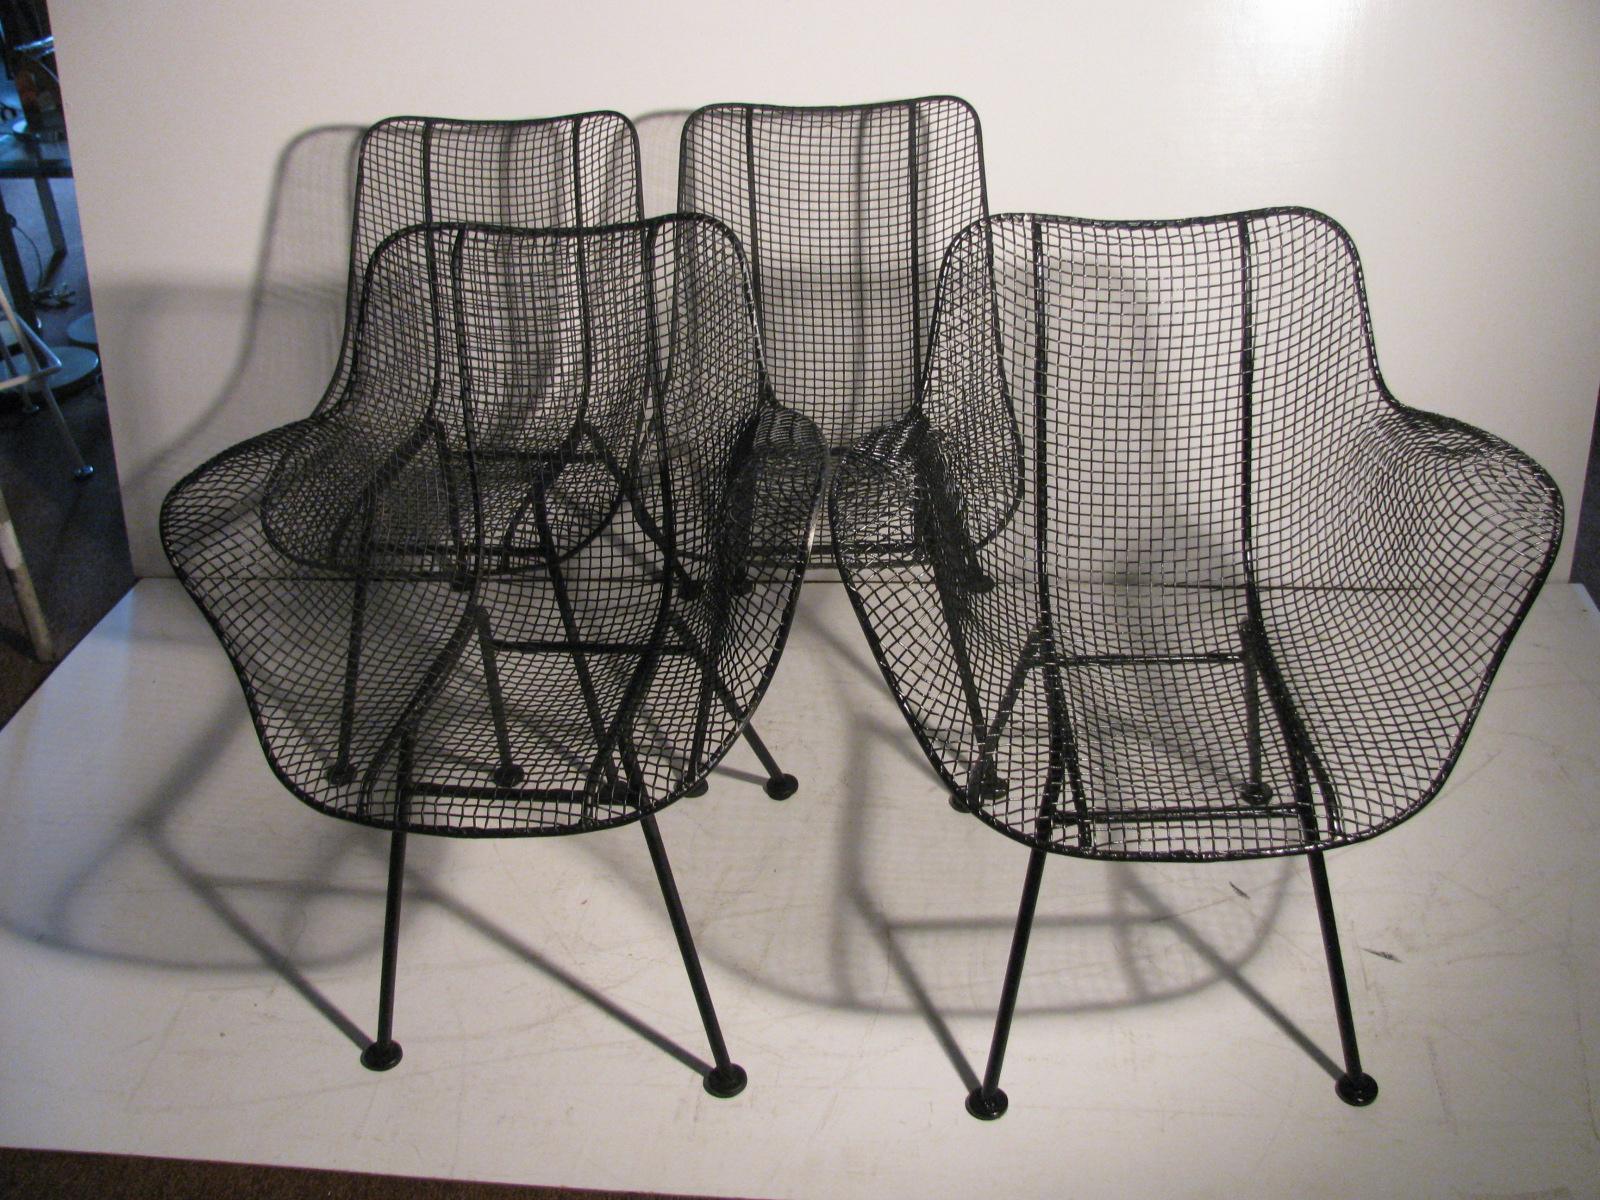 Set of 4 sculptura outdoor \ indoor dining patio chairs. Set consists of 2 arm chairs and 2 side chairs. Wire mesh sprayed flat black and in excellent vintage condition. Side chair dimensions are 19 W x 31.5 H x 23 D x 17 seat height. Comfortable